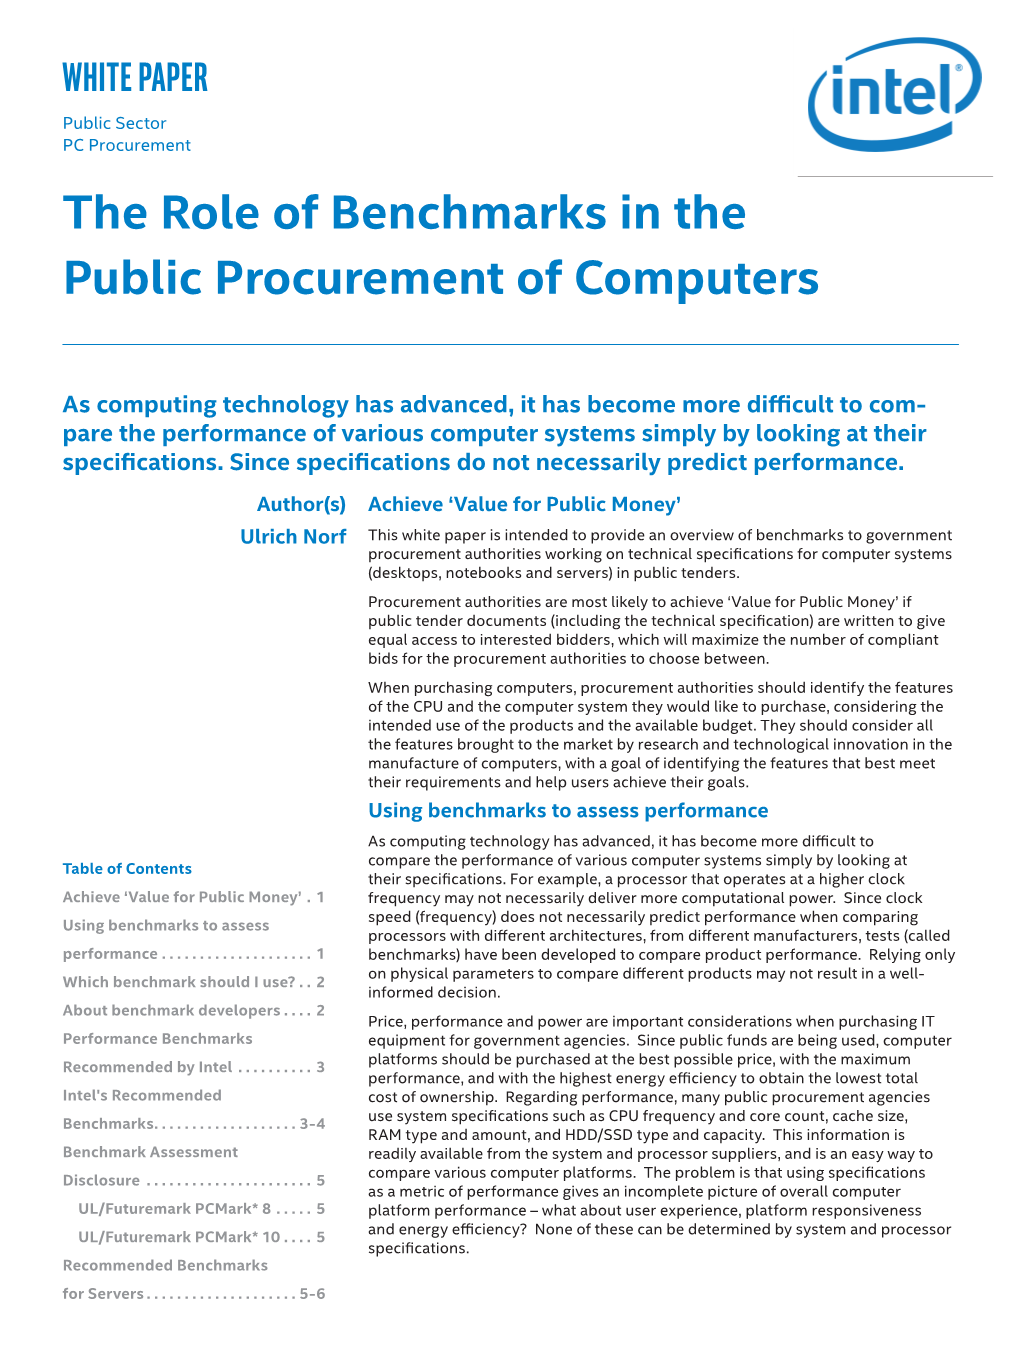 Role of Benchmarks in Public Procurement of Computers